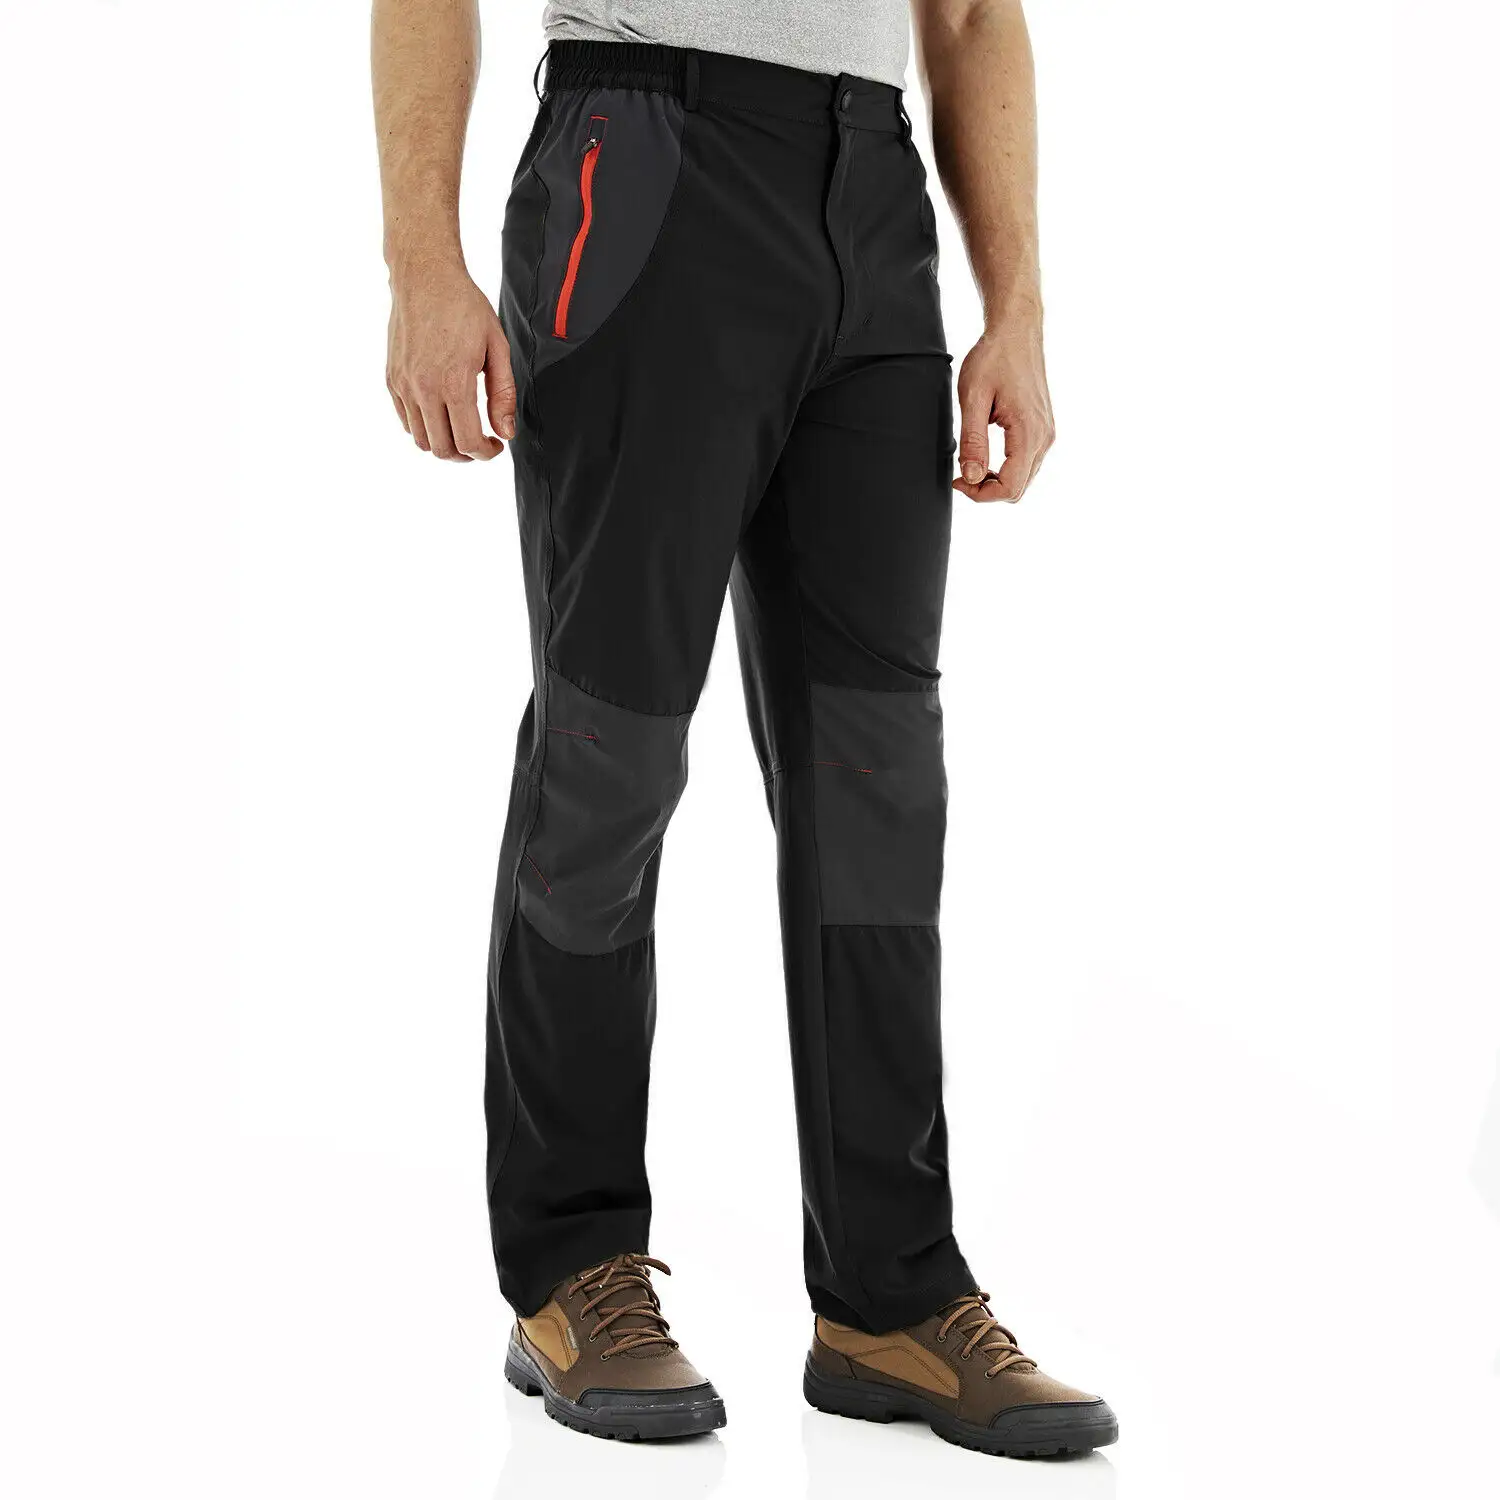 Top design mens soft shell pants winter cargo pants collection for men on wholesale price with best quality material